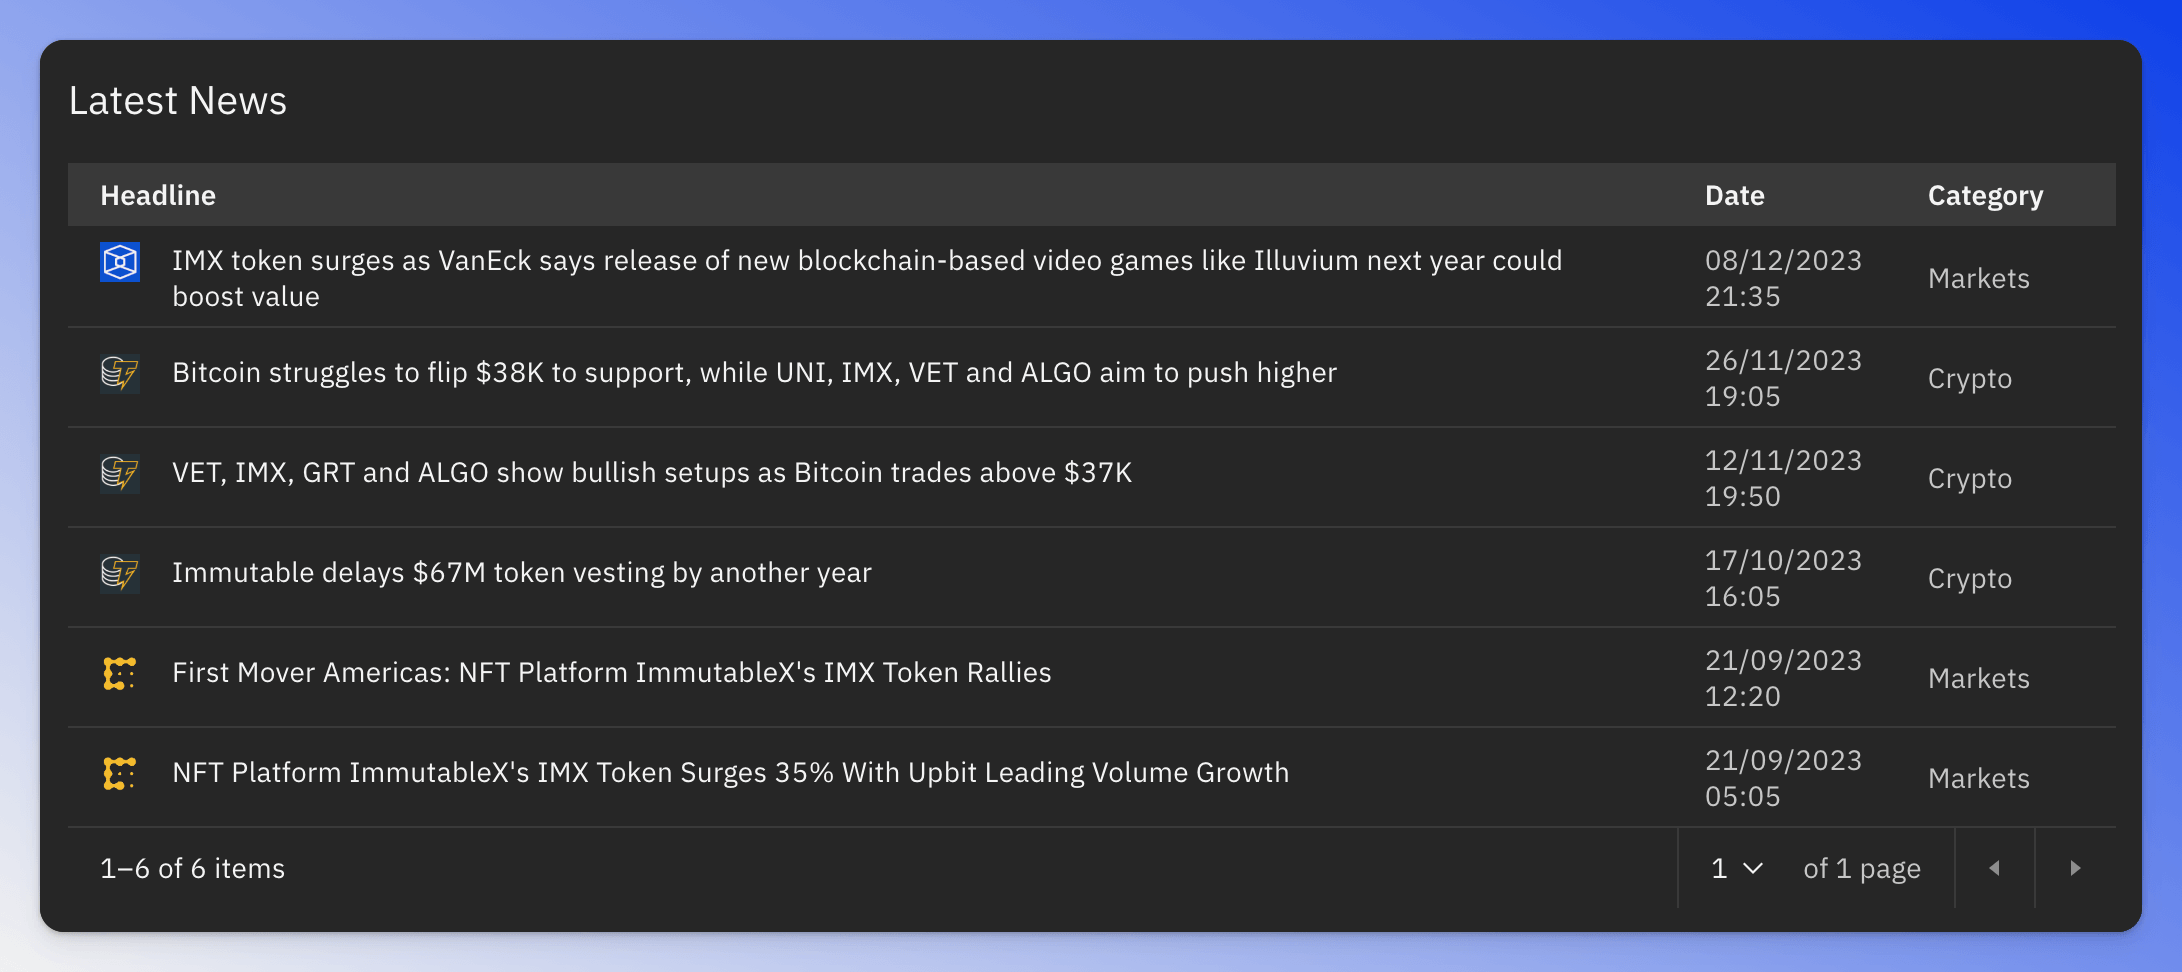 Screenshot of the news section showing the latest news articles related to the token.